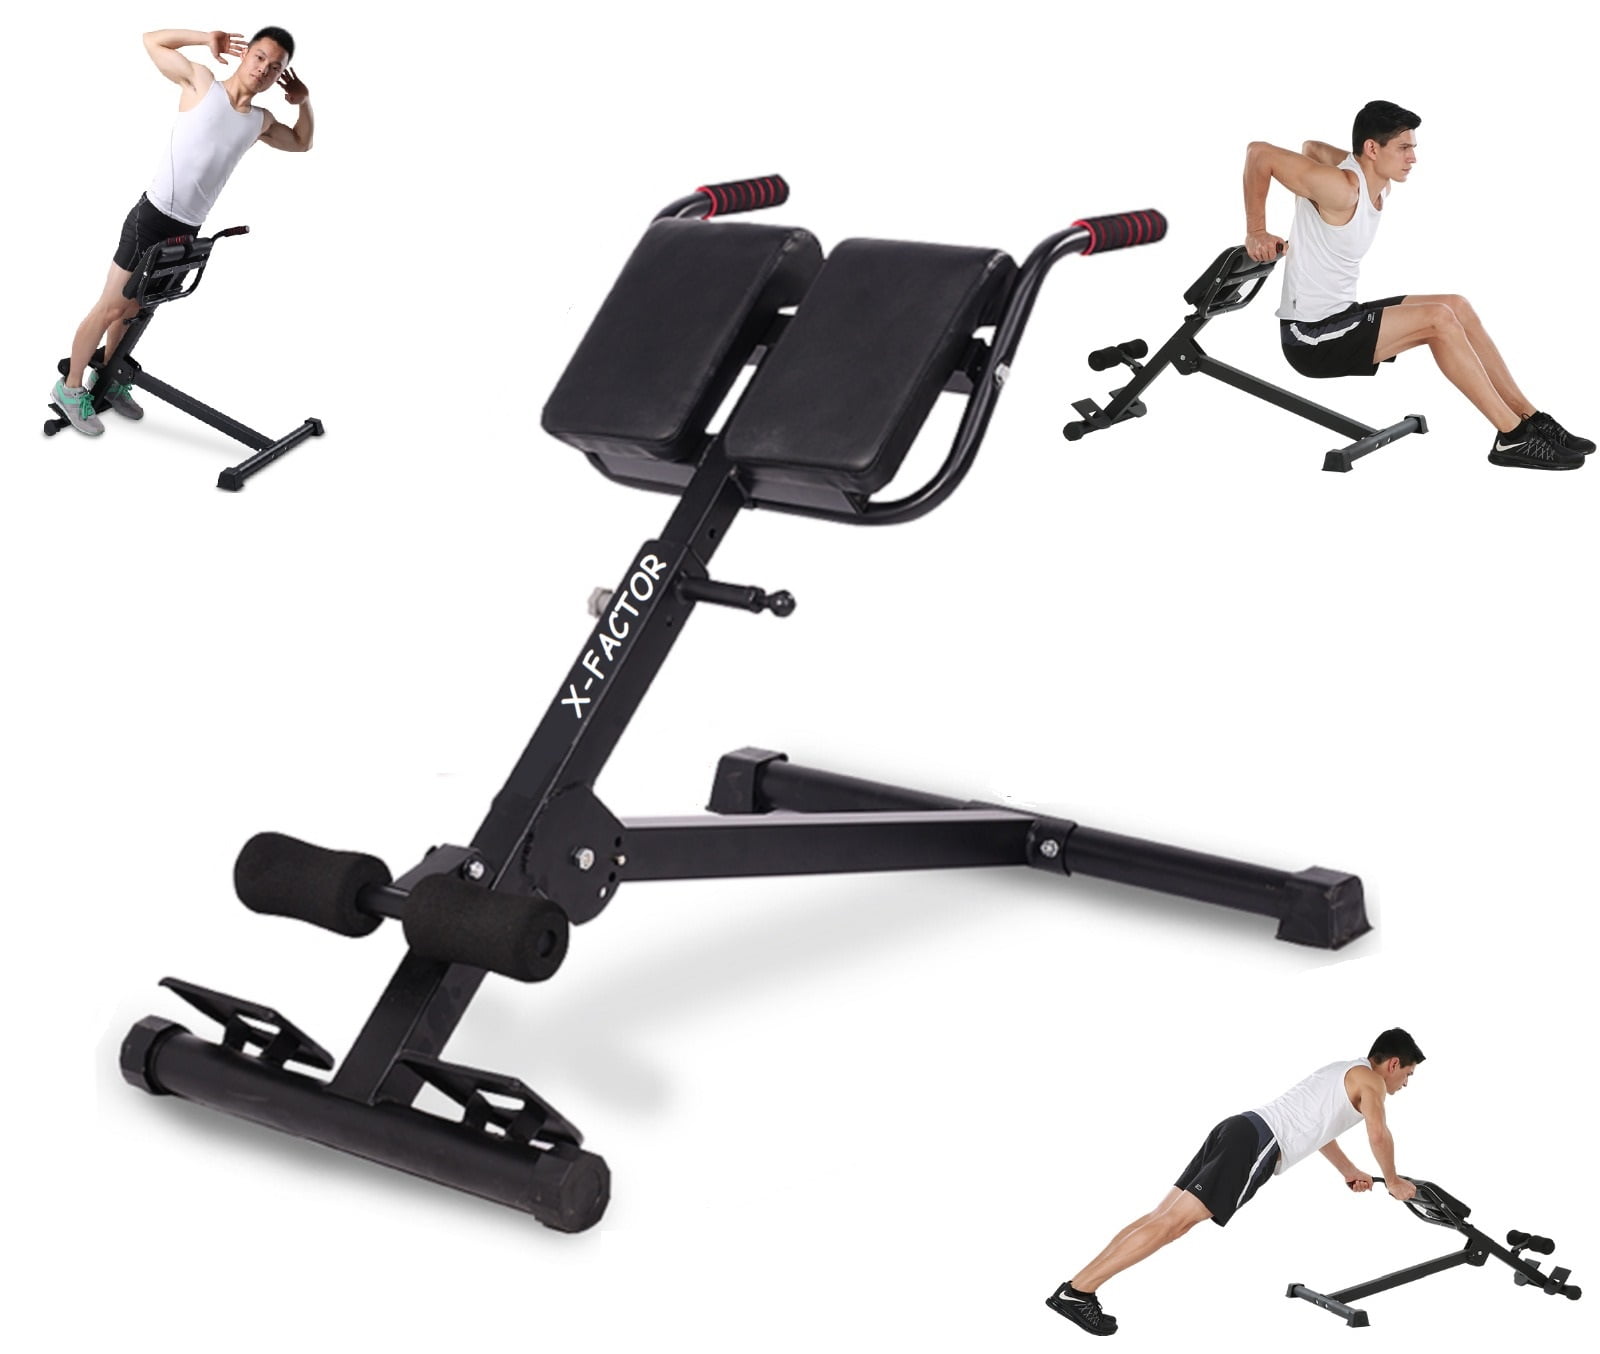 Foldable Health Fitness Stamina Pro Ab Core Strength and Hyper Bench Roman Chair 